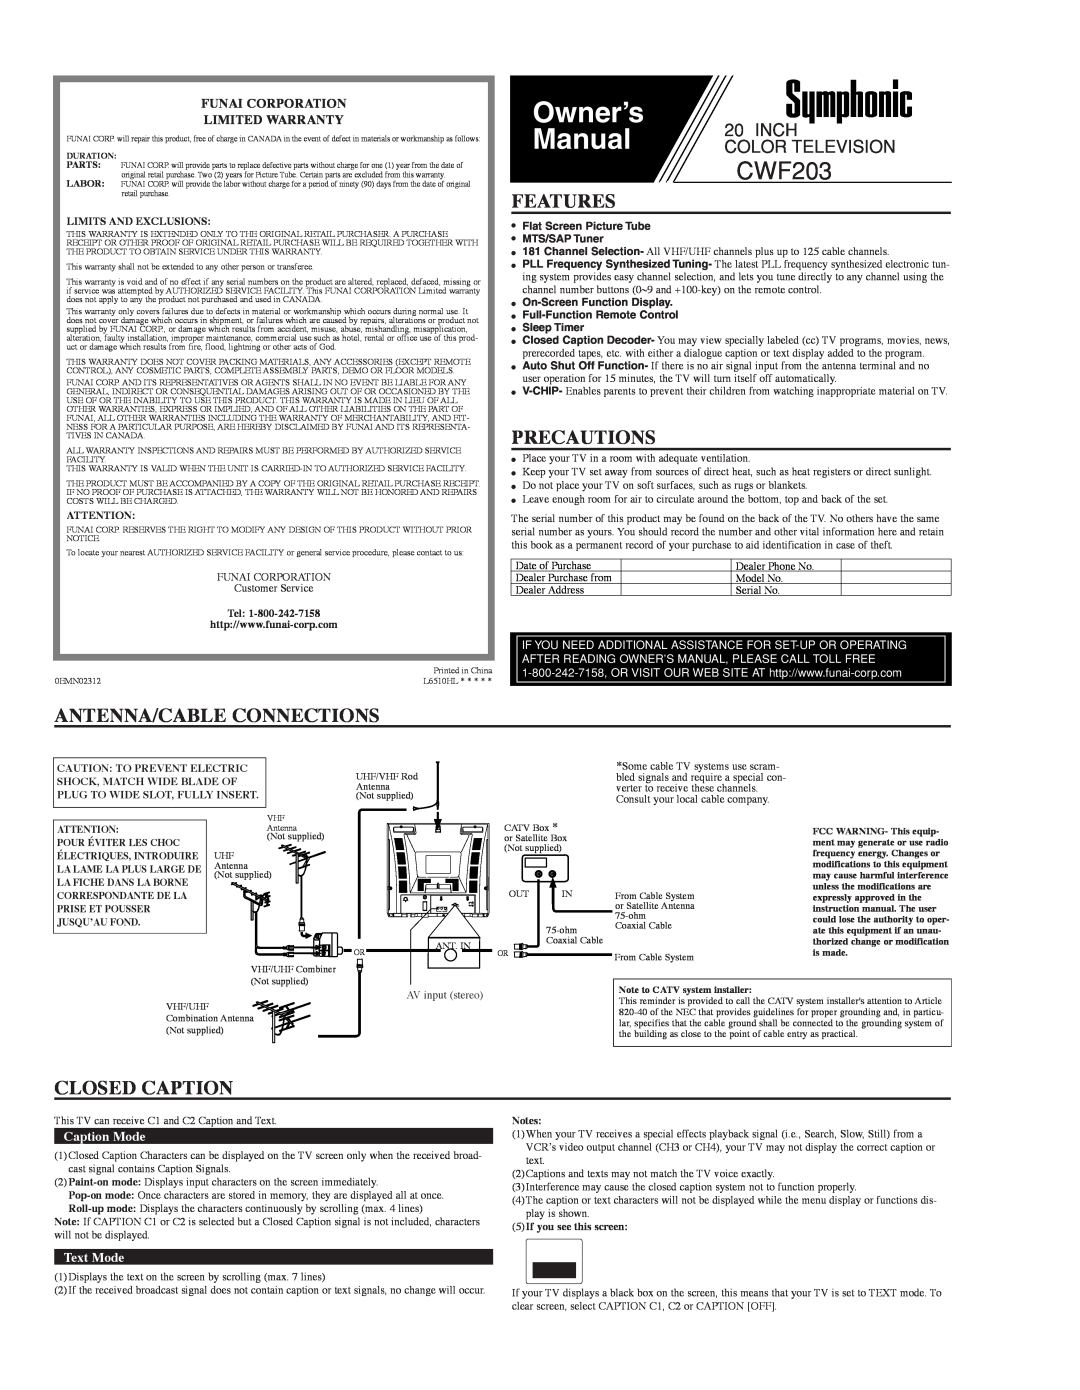 Symphonic CWF203 owner manual Features, Precautions, Antenna/Cable Connections, Closed Caption, Caption Mode, Text Mode 